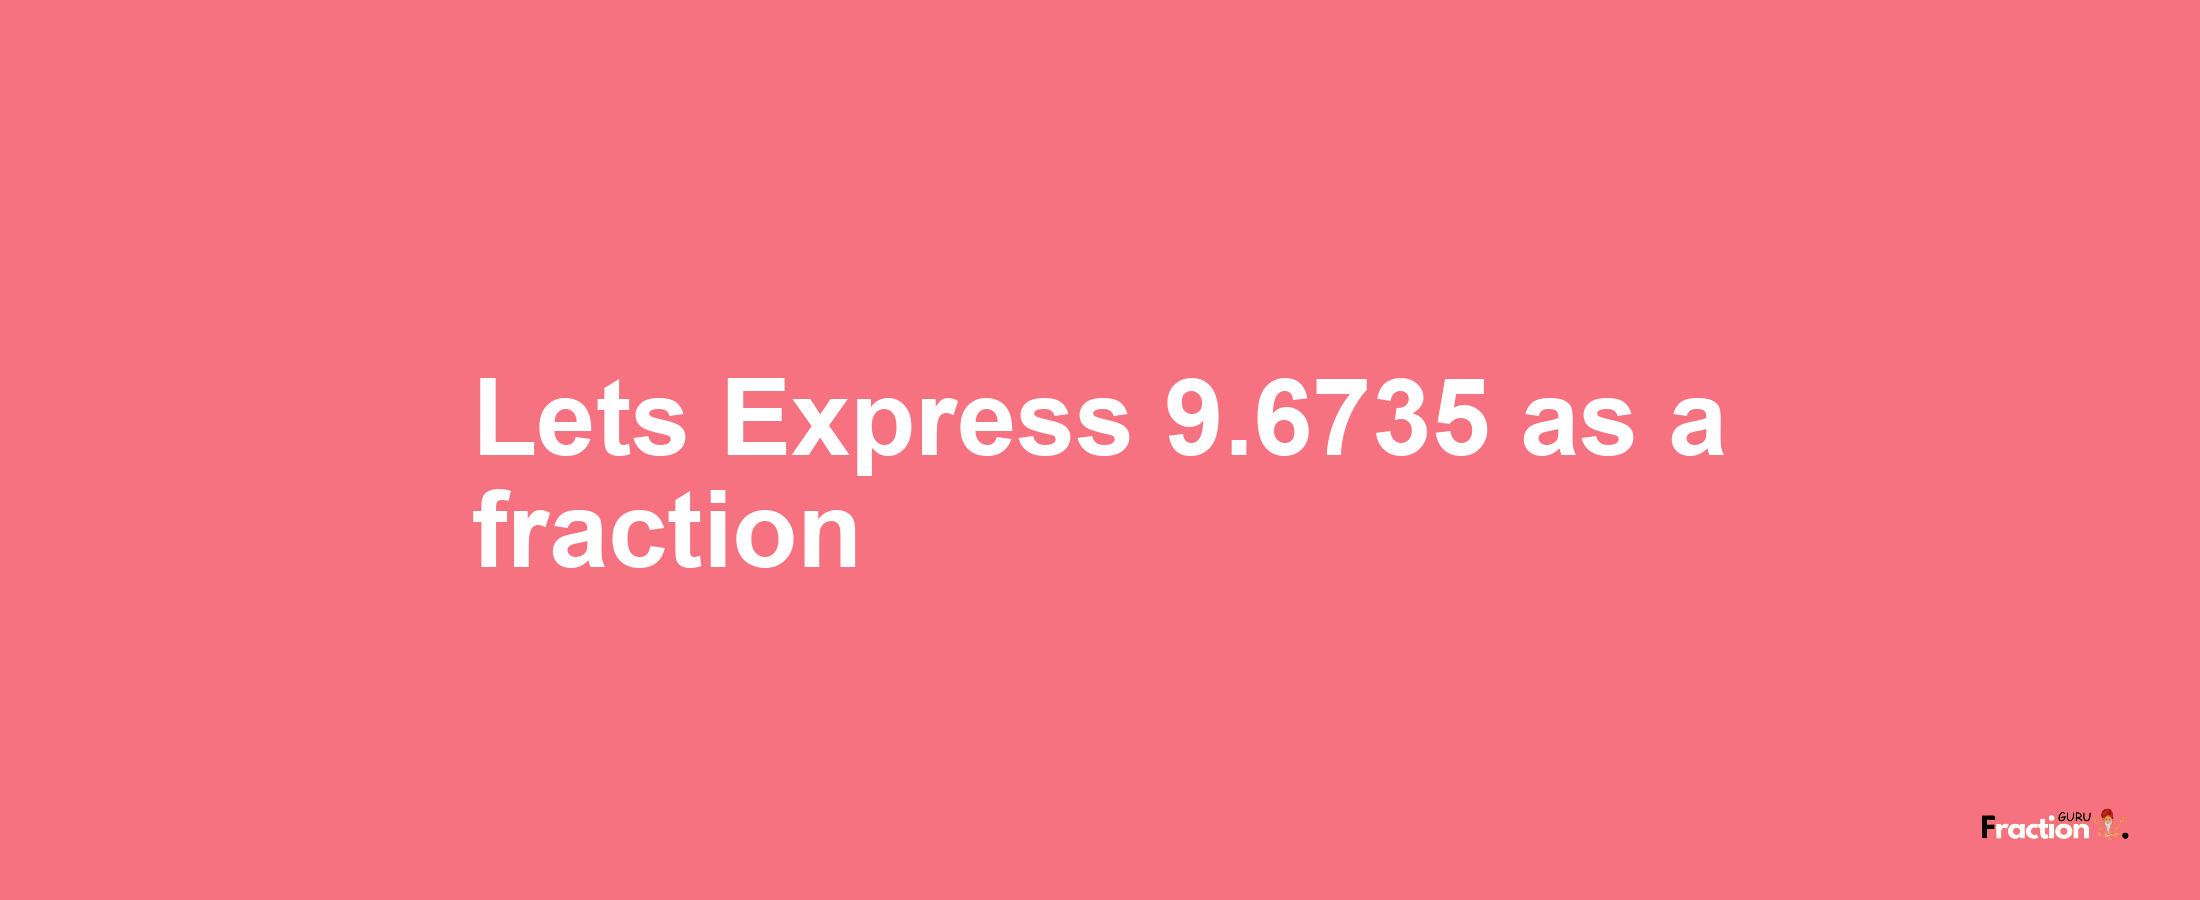 Lets Express 9.6735 as afraction